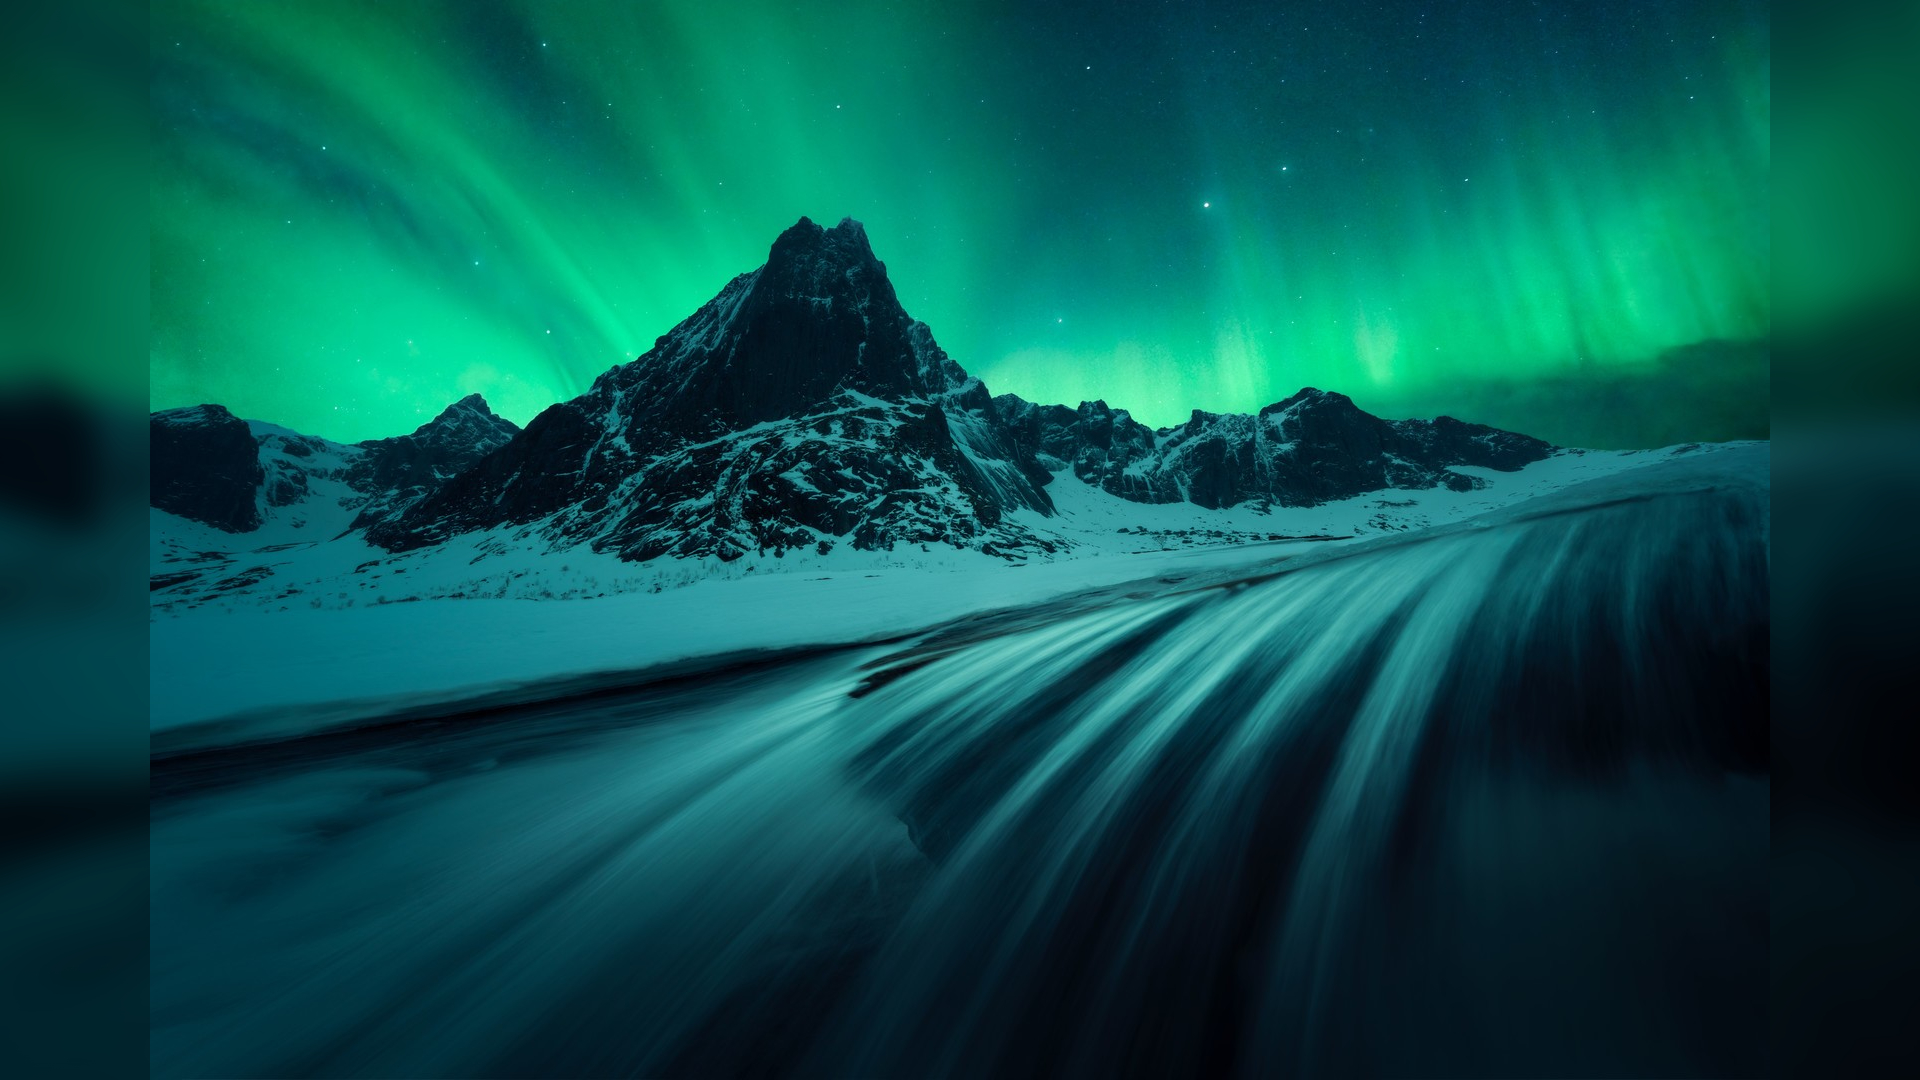 A photo of the northern lights, part of the travel photography blog Capture the Atlas 2022 Northern Lights Photographer of the Year collection. This image was taken by Filip Hrebenda.